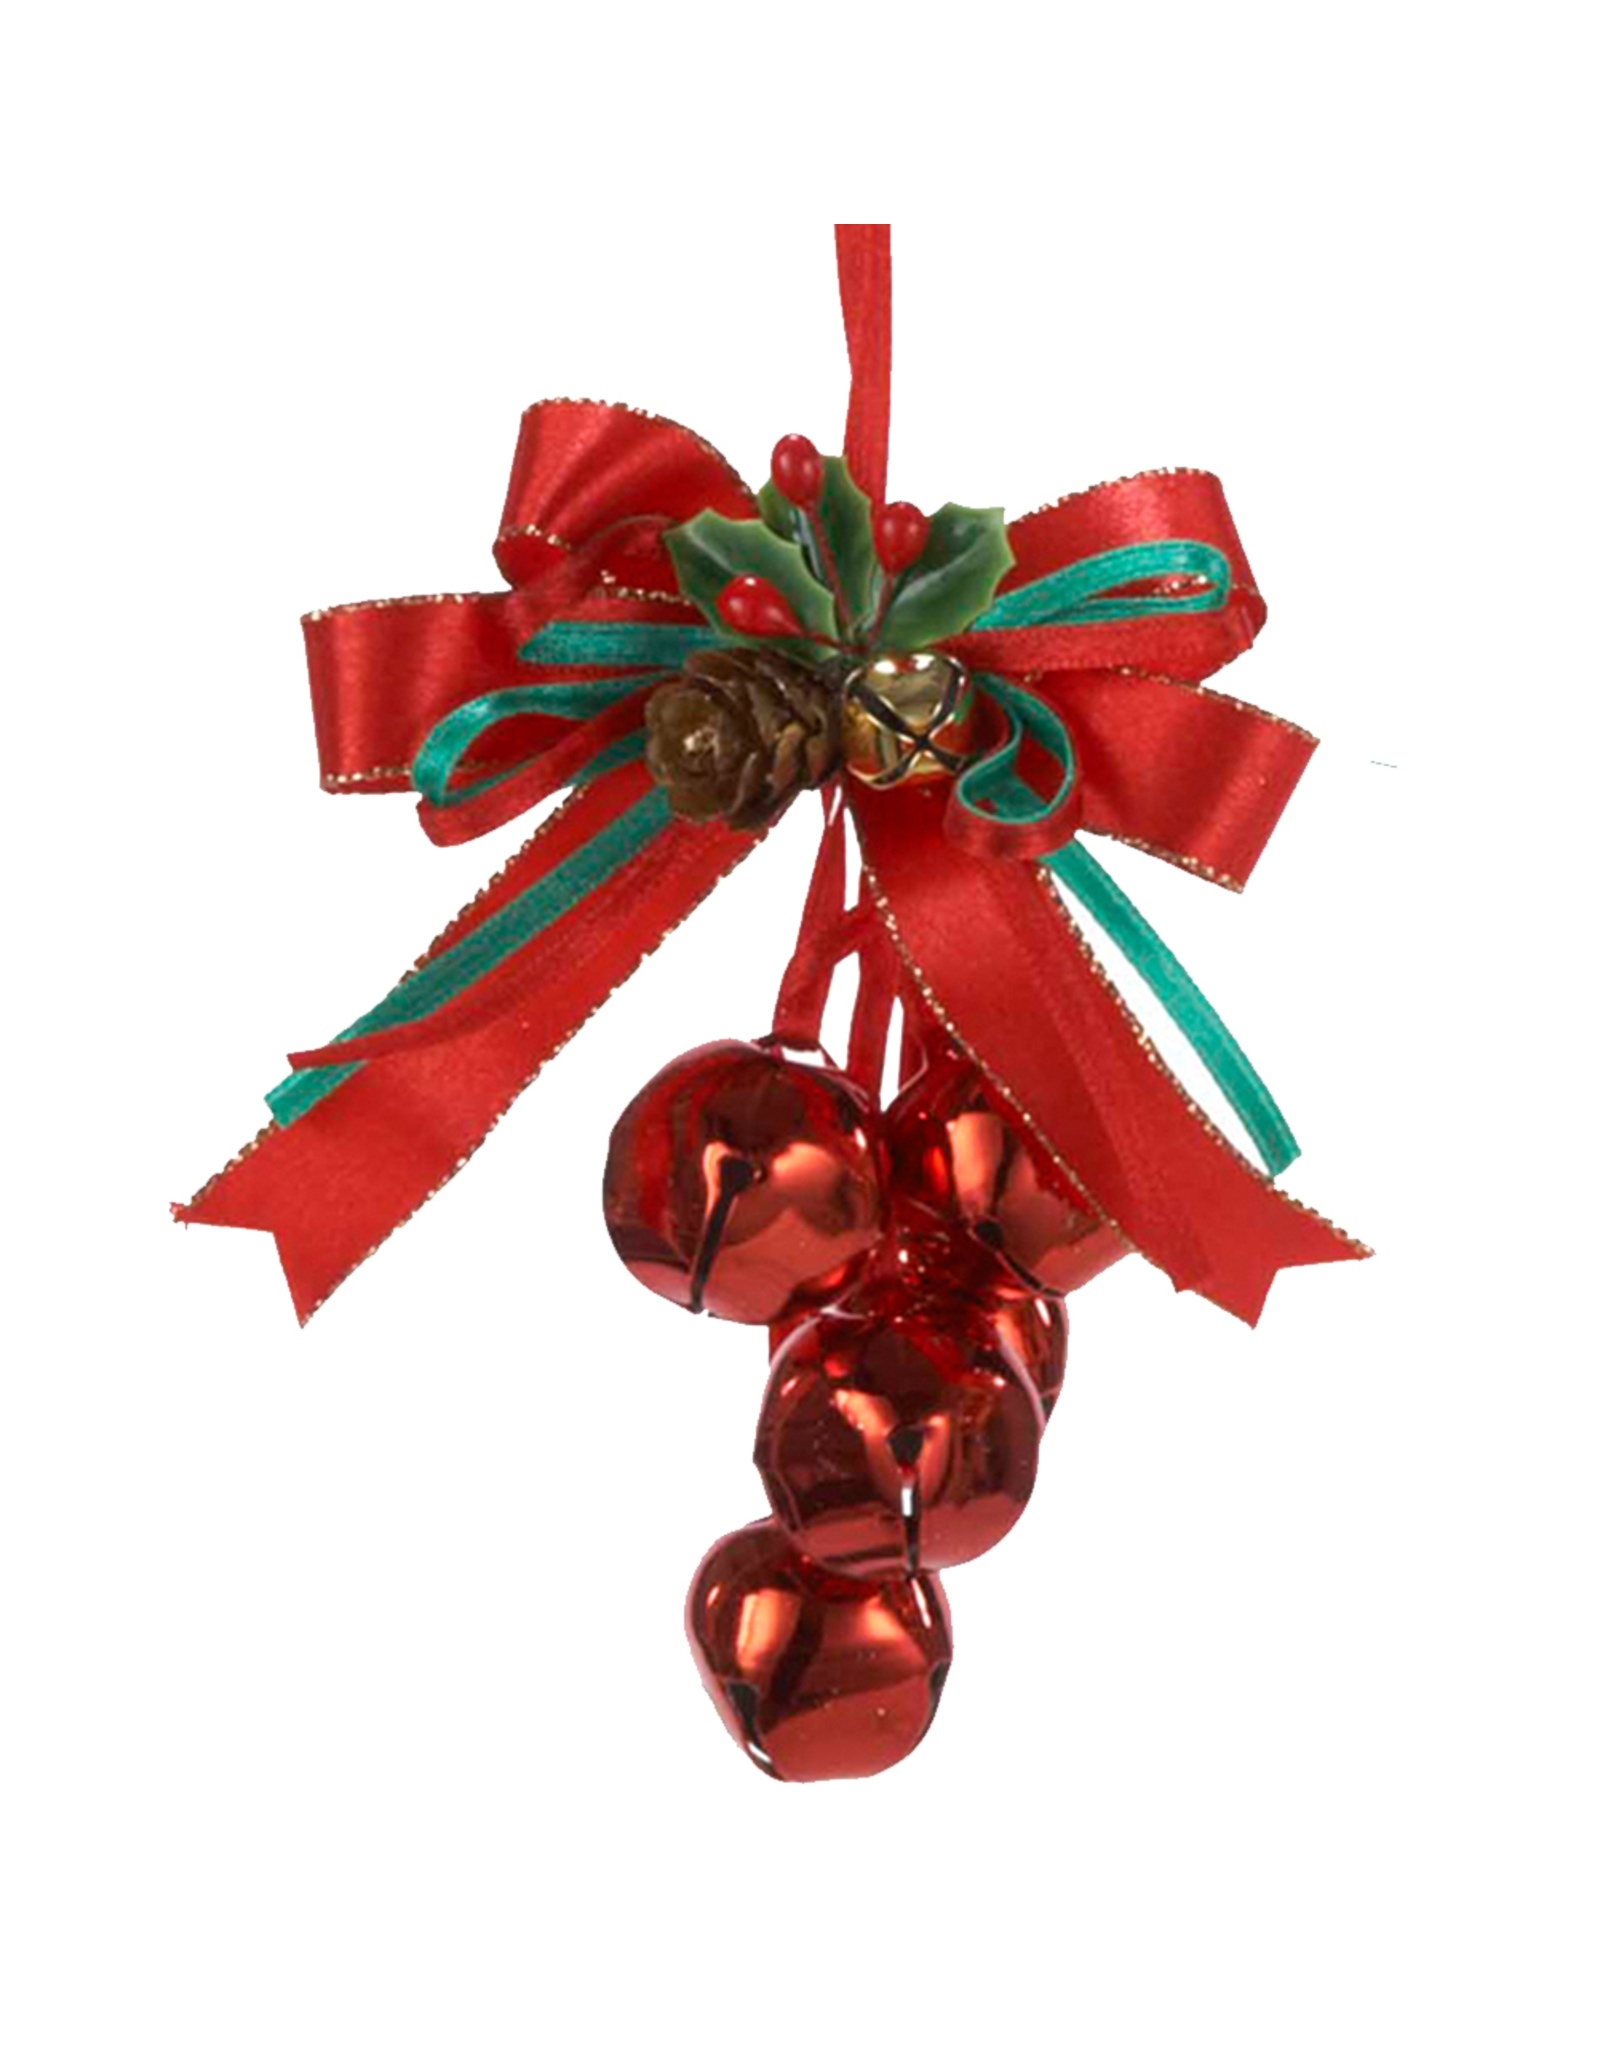 8” Metal Jingle Bell with Bow Accent Ornament